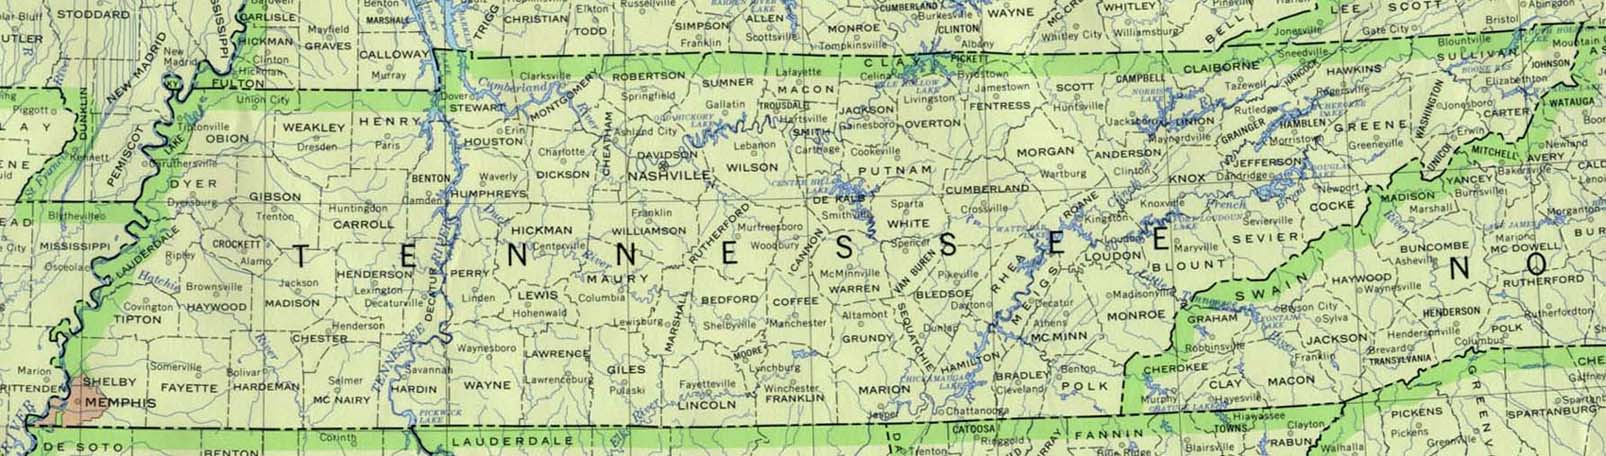 map of tennessee bearing